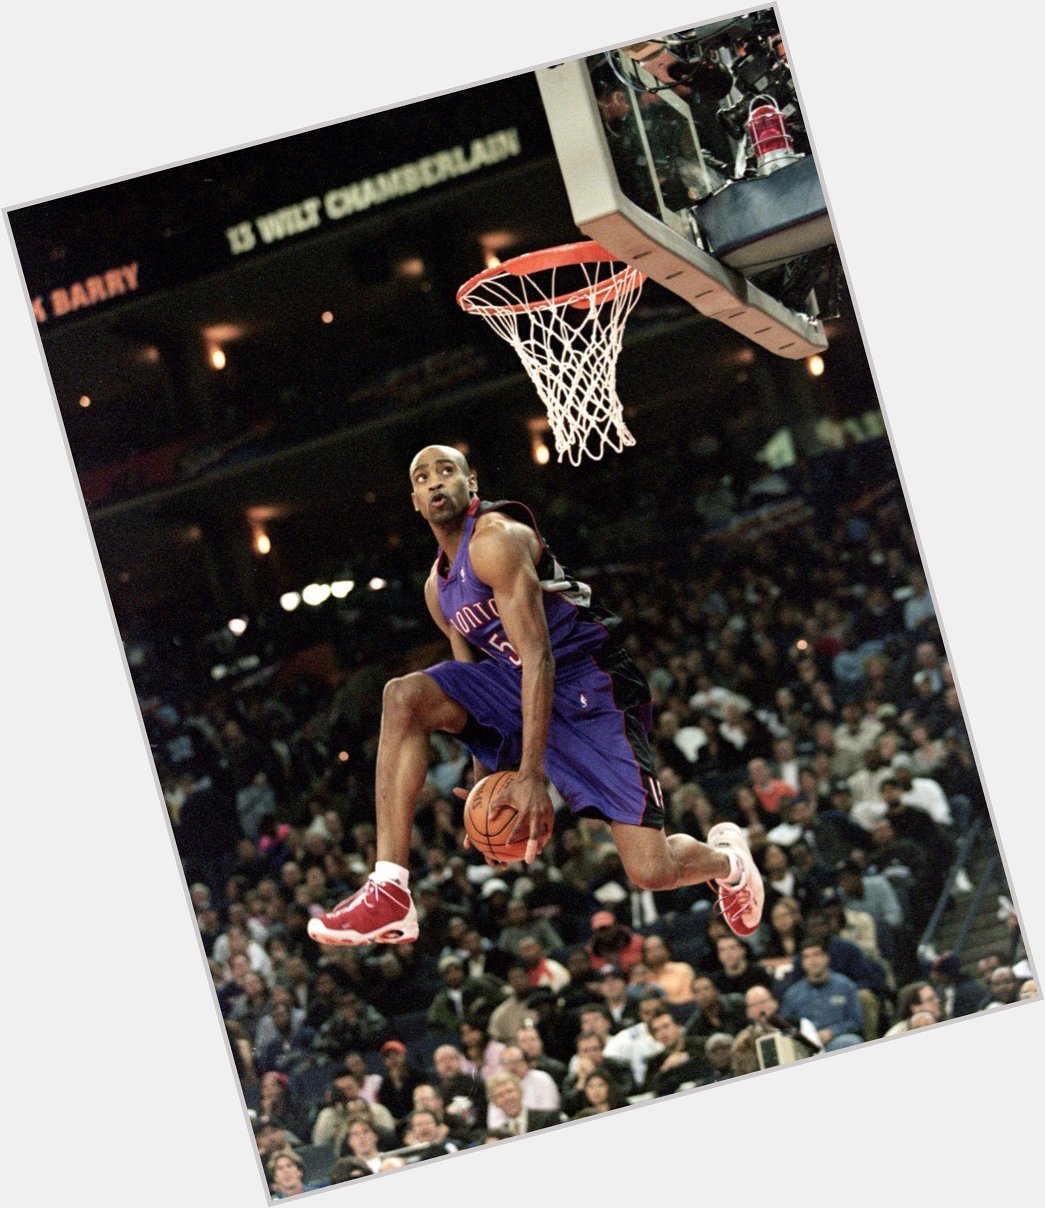 Happy Birthday Vince Carter!  42 today...still playing..still impactful...not normal..nor is that easy...props given 